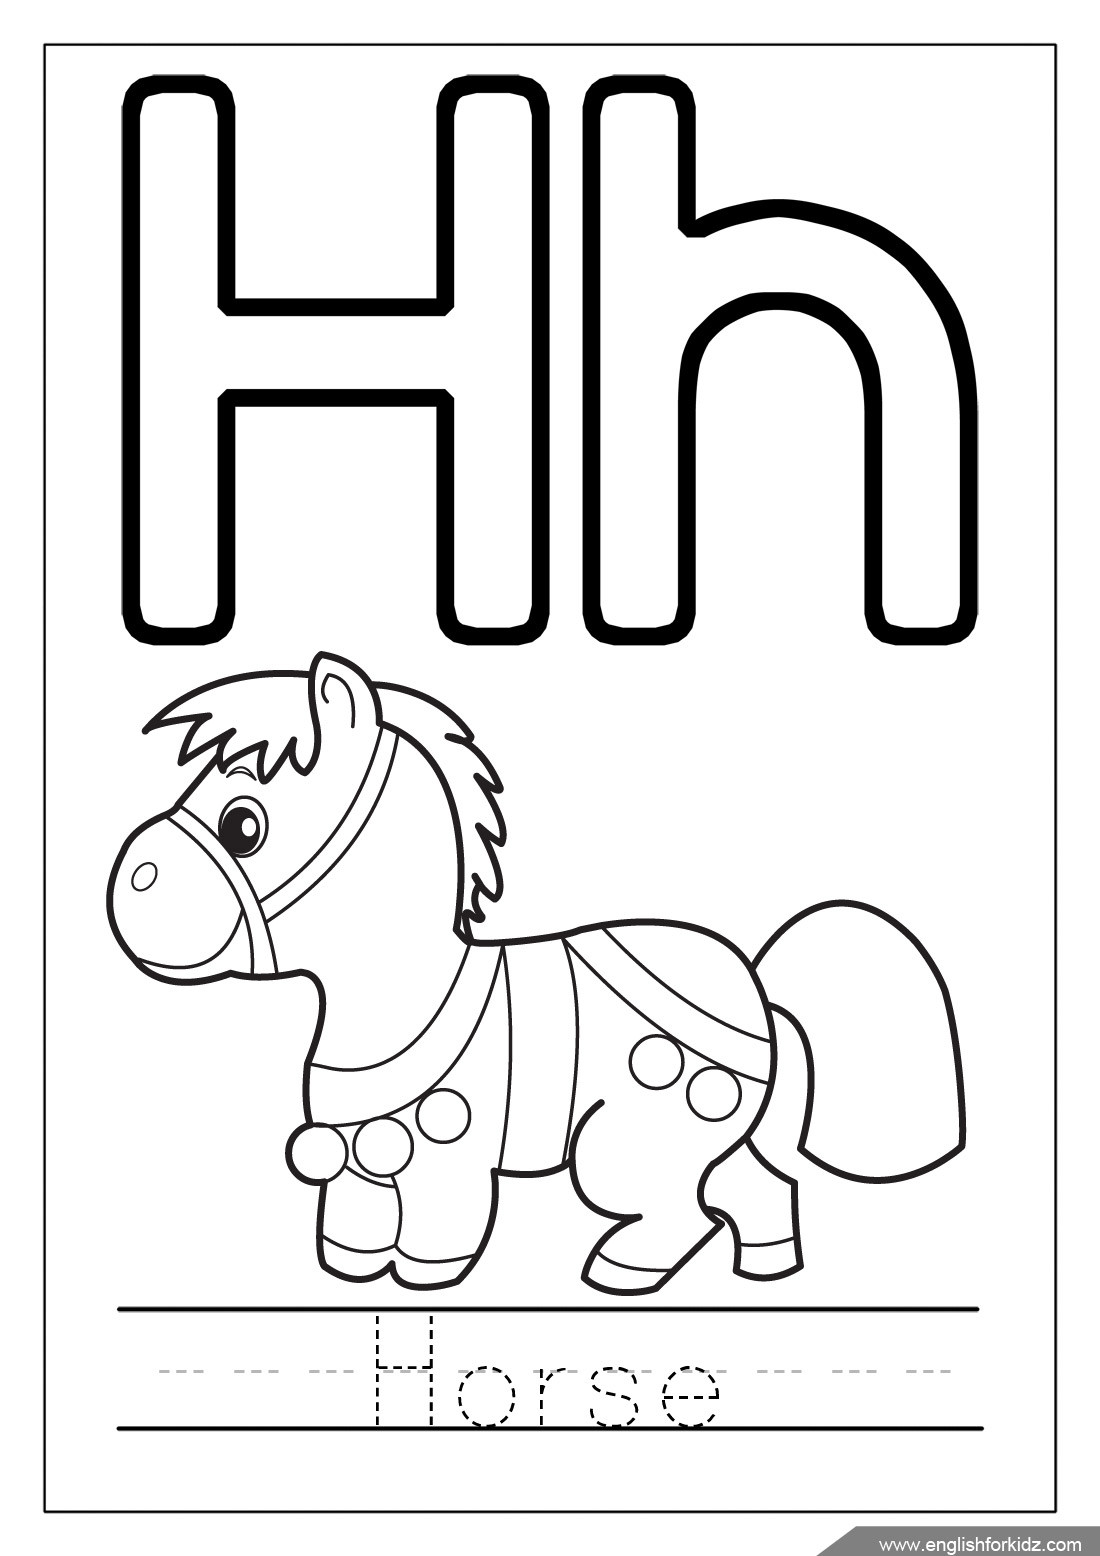 Letter H Coloring Pages For Toddlers
 Printable Alphabet Coloring Pages Letters Influenza A